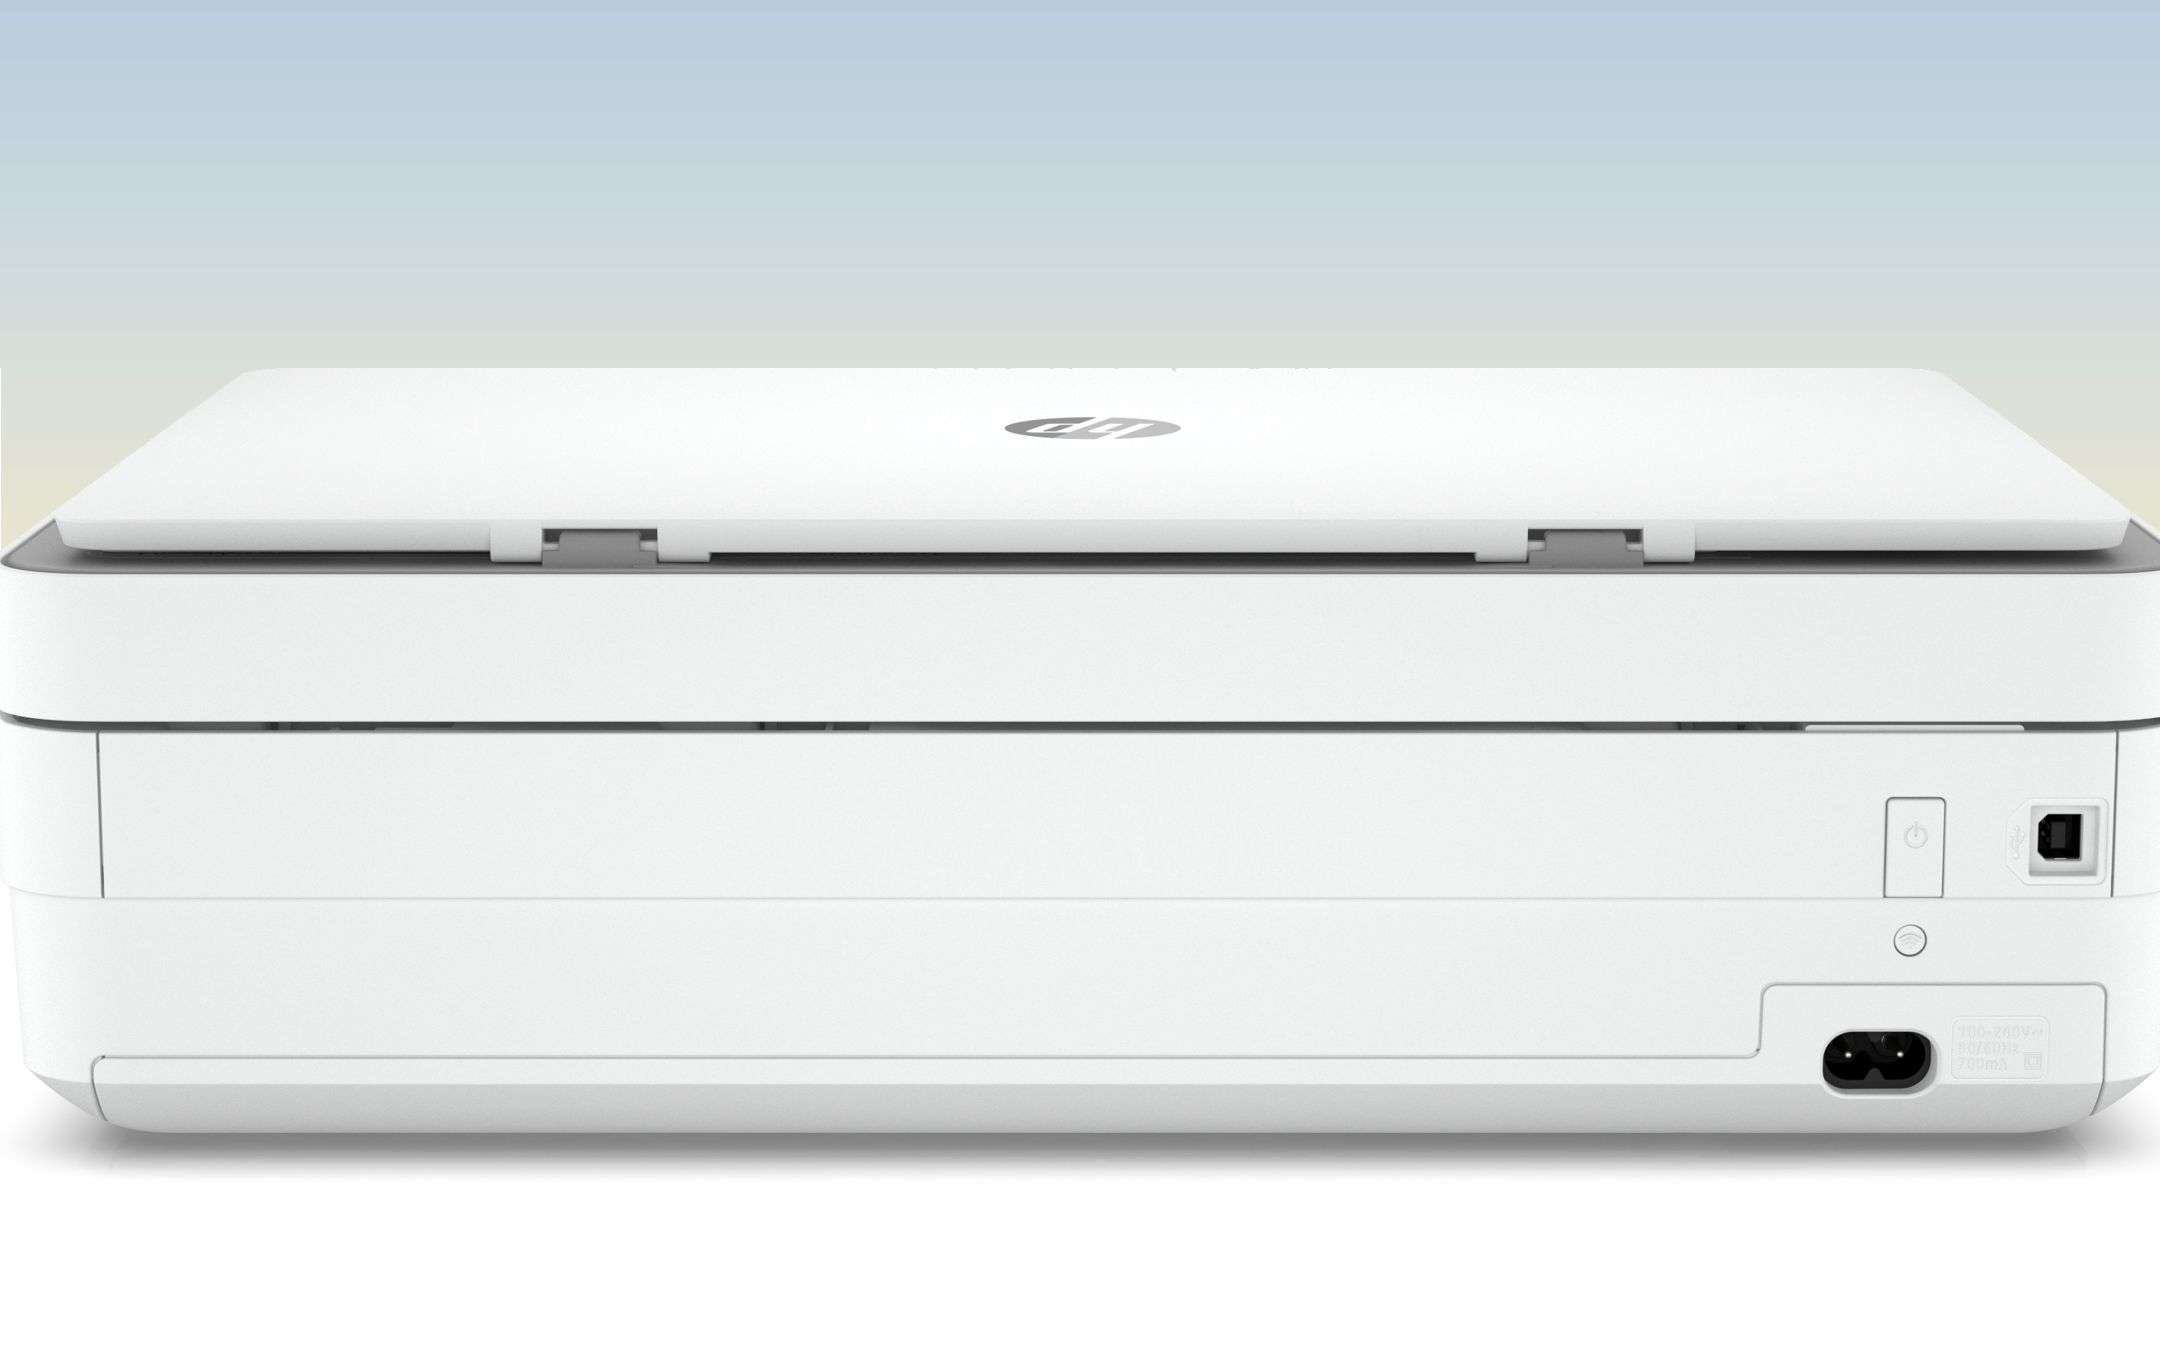 HP Envy 6000 and HP Deskjet 2700, for home and office